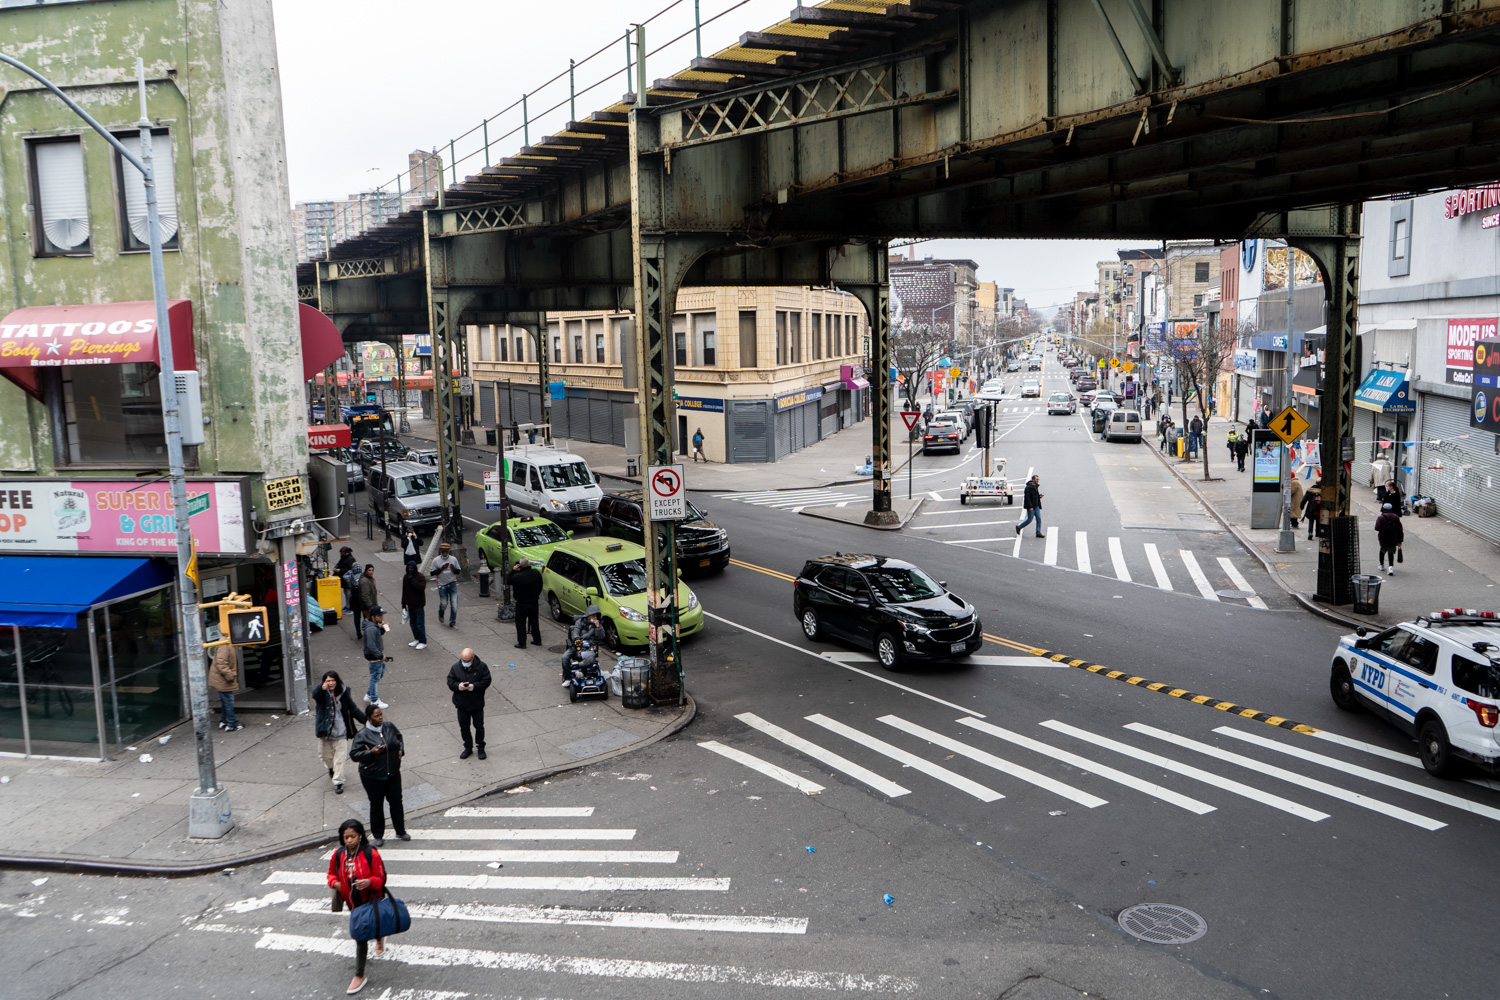 March 30, 2020: Thinning crowds at Broadway and Flushing Avenue, Flushing Avenue subway station, Queens, New York. © Camilo José Vergara